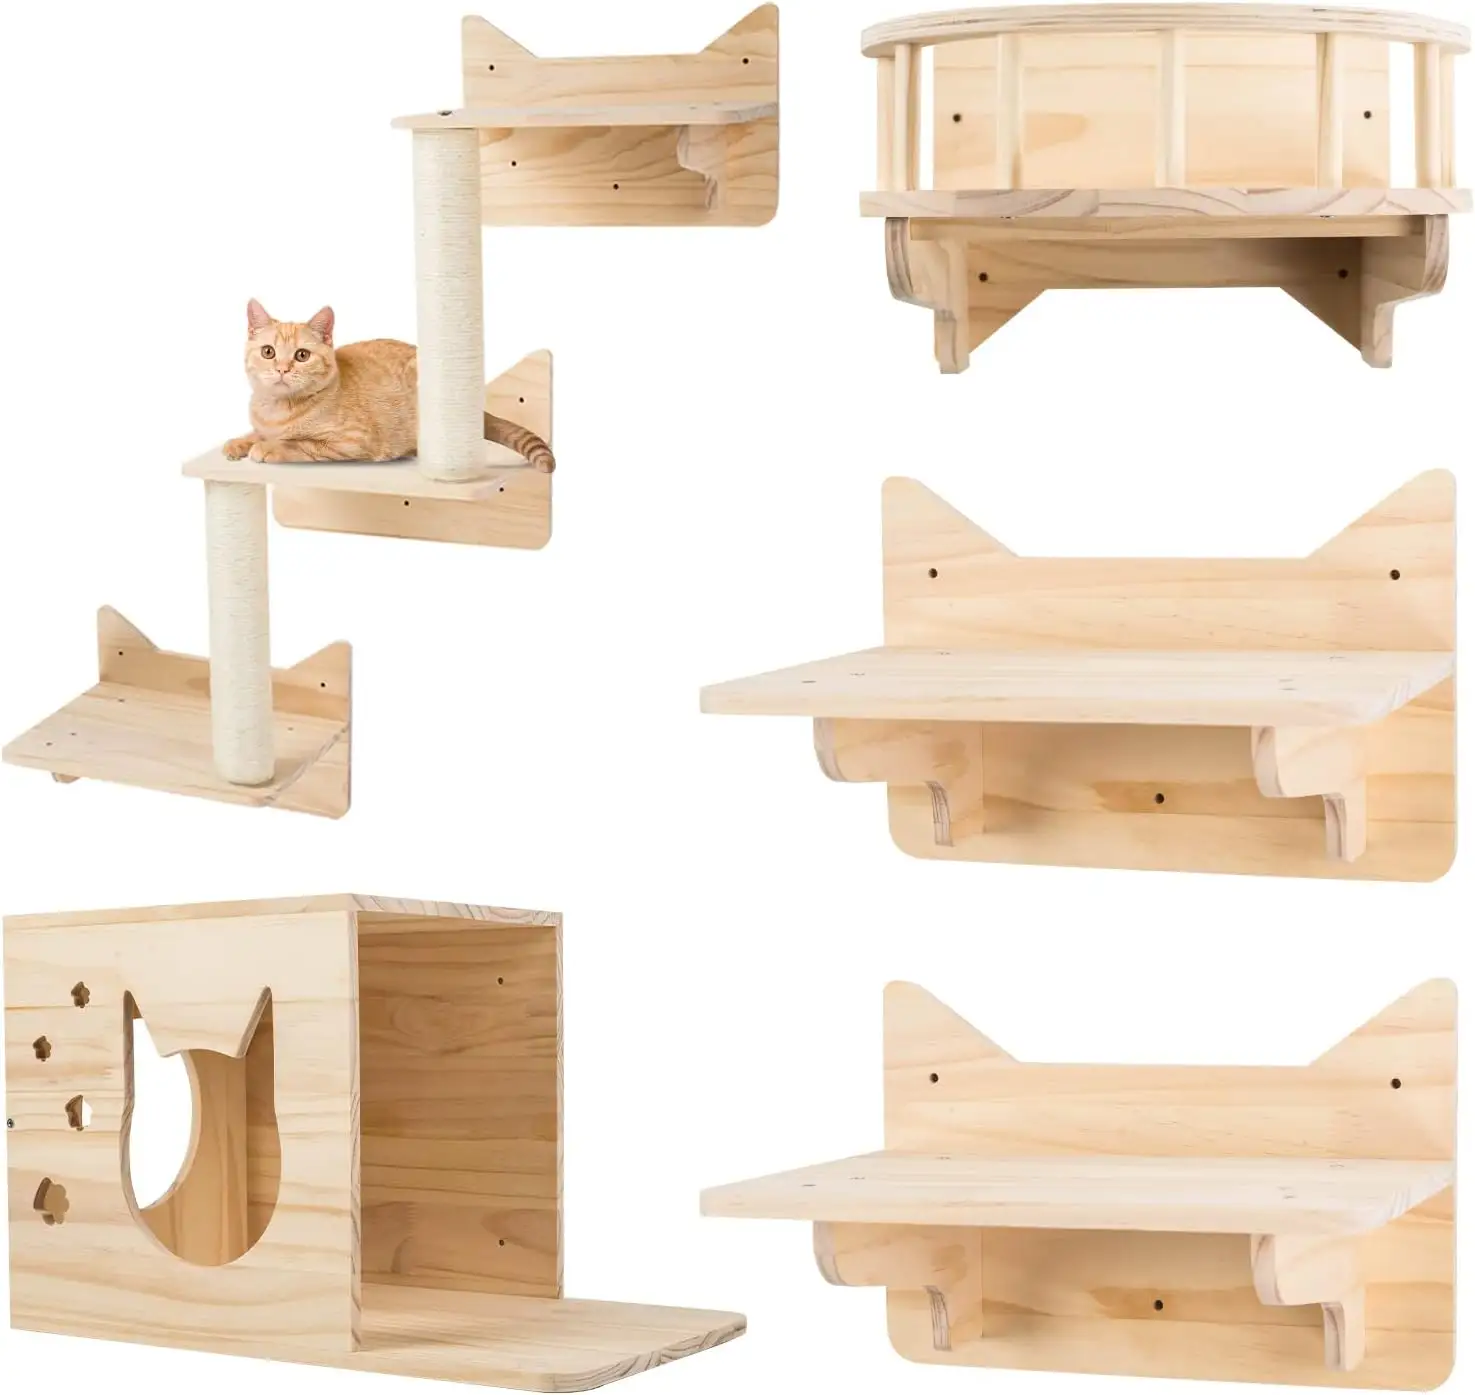 Pine Cat Wall Frame Climbing Frame Set of 5 Cat Wall Furniture Cat Shelves and Perches for Walls